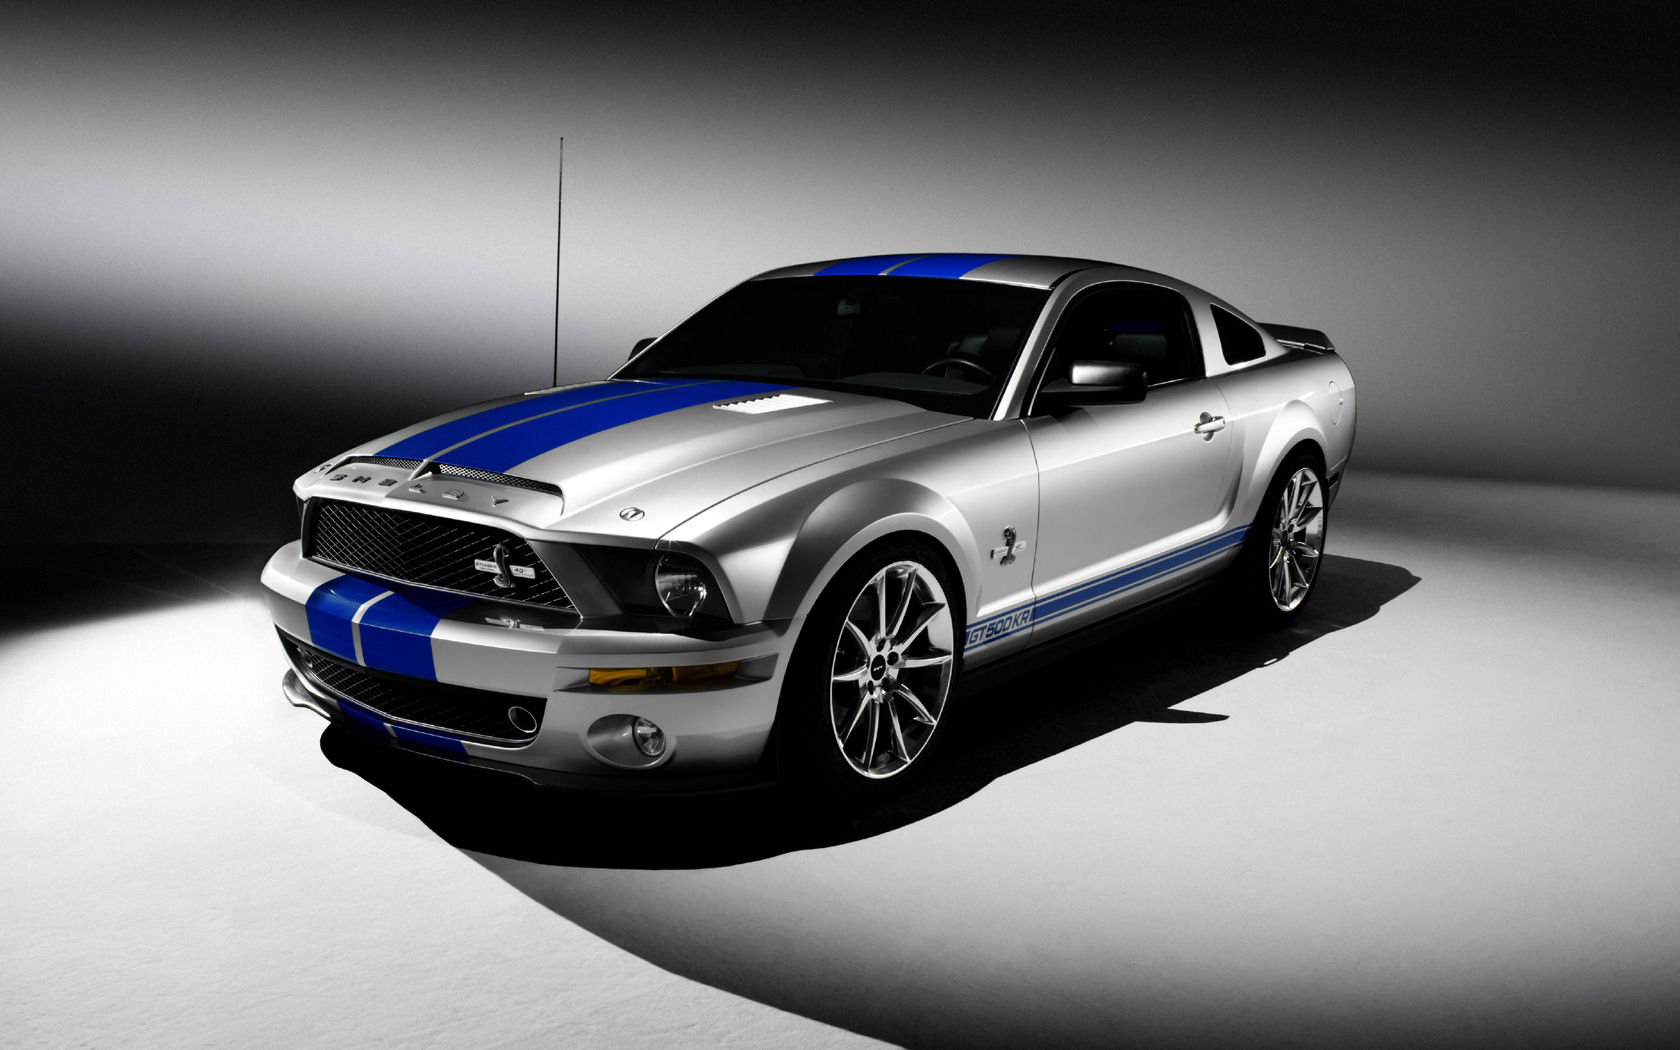 Ford Ford Mustang Ford Mustang Desktop Wallpapers Widescreen 1680x1050